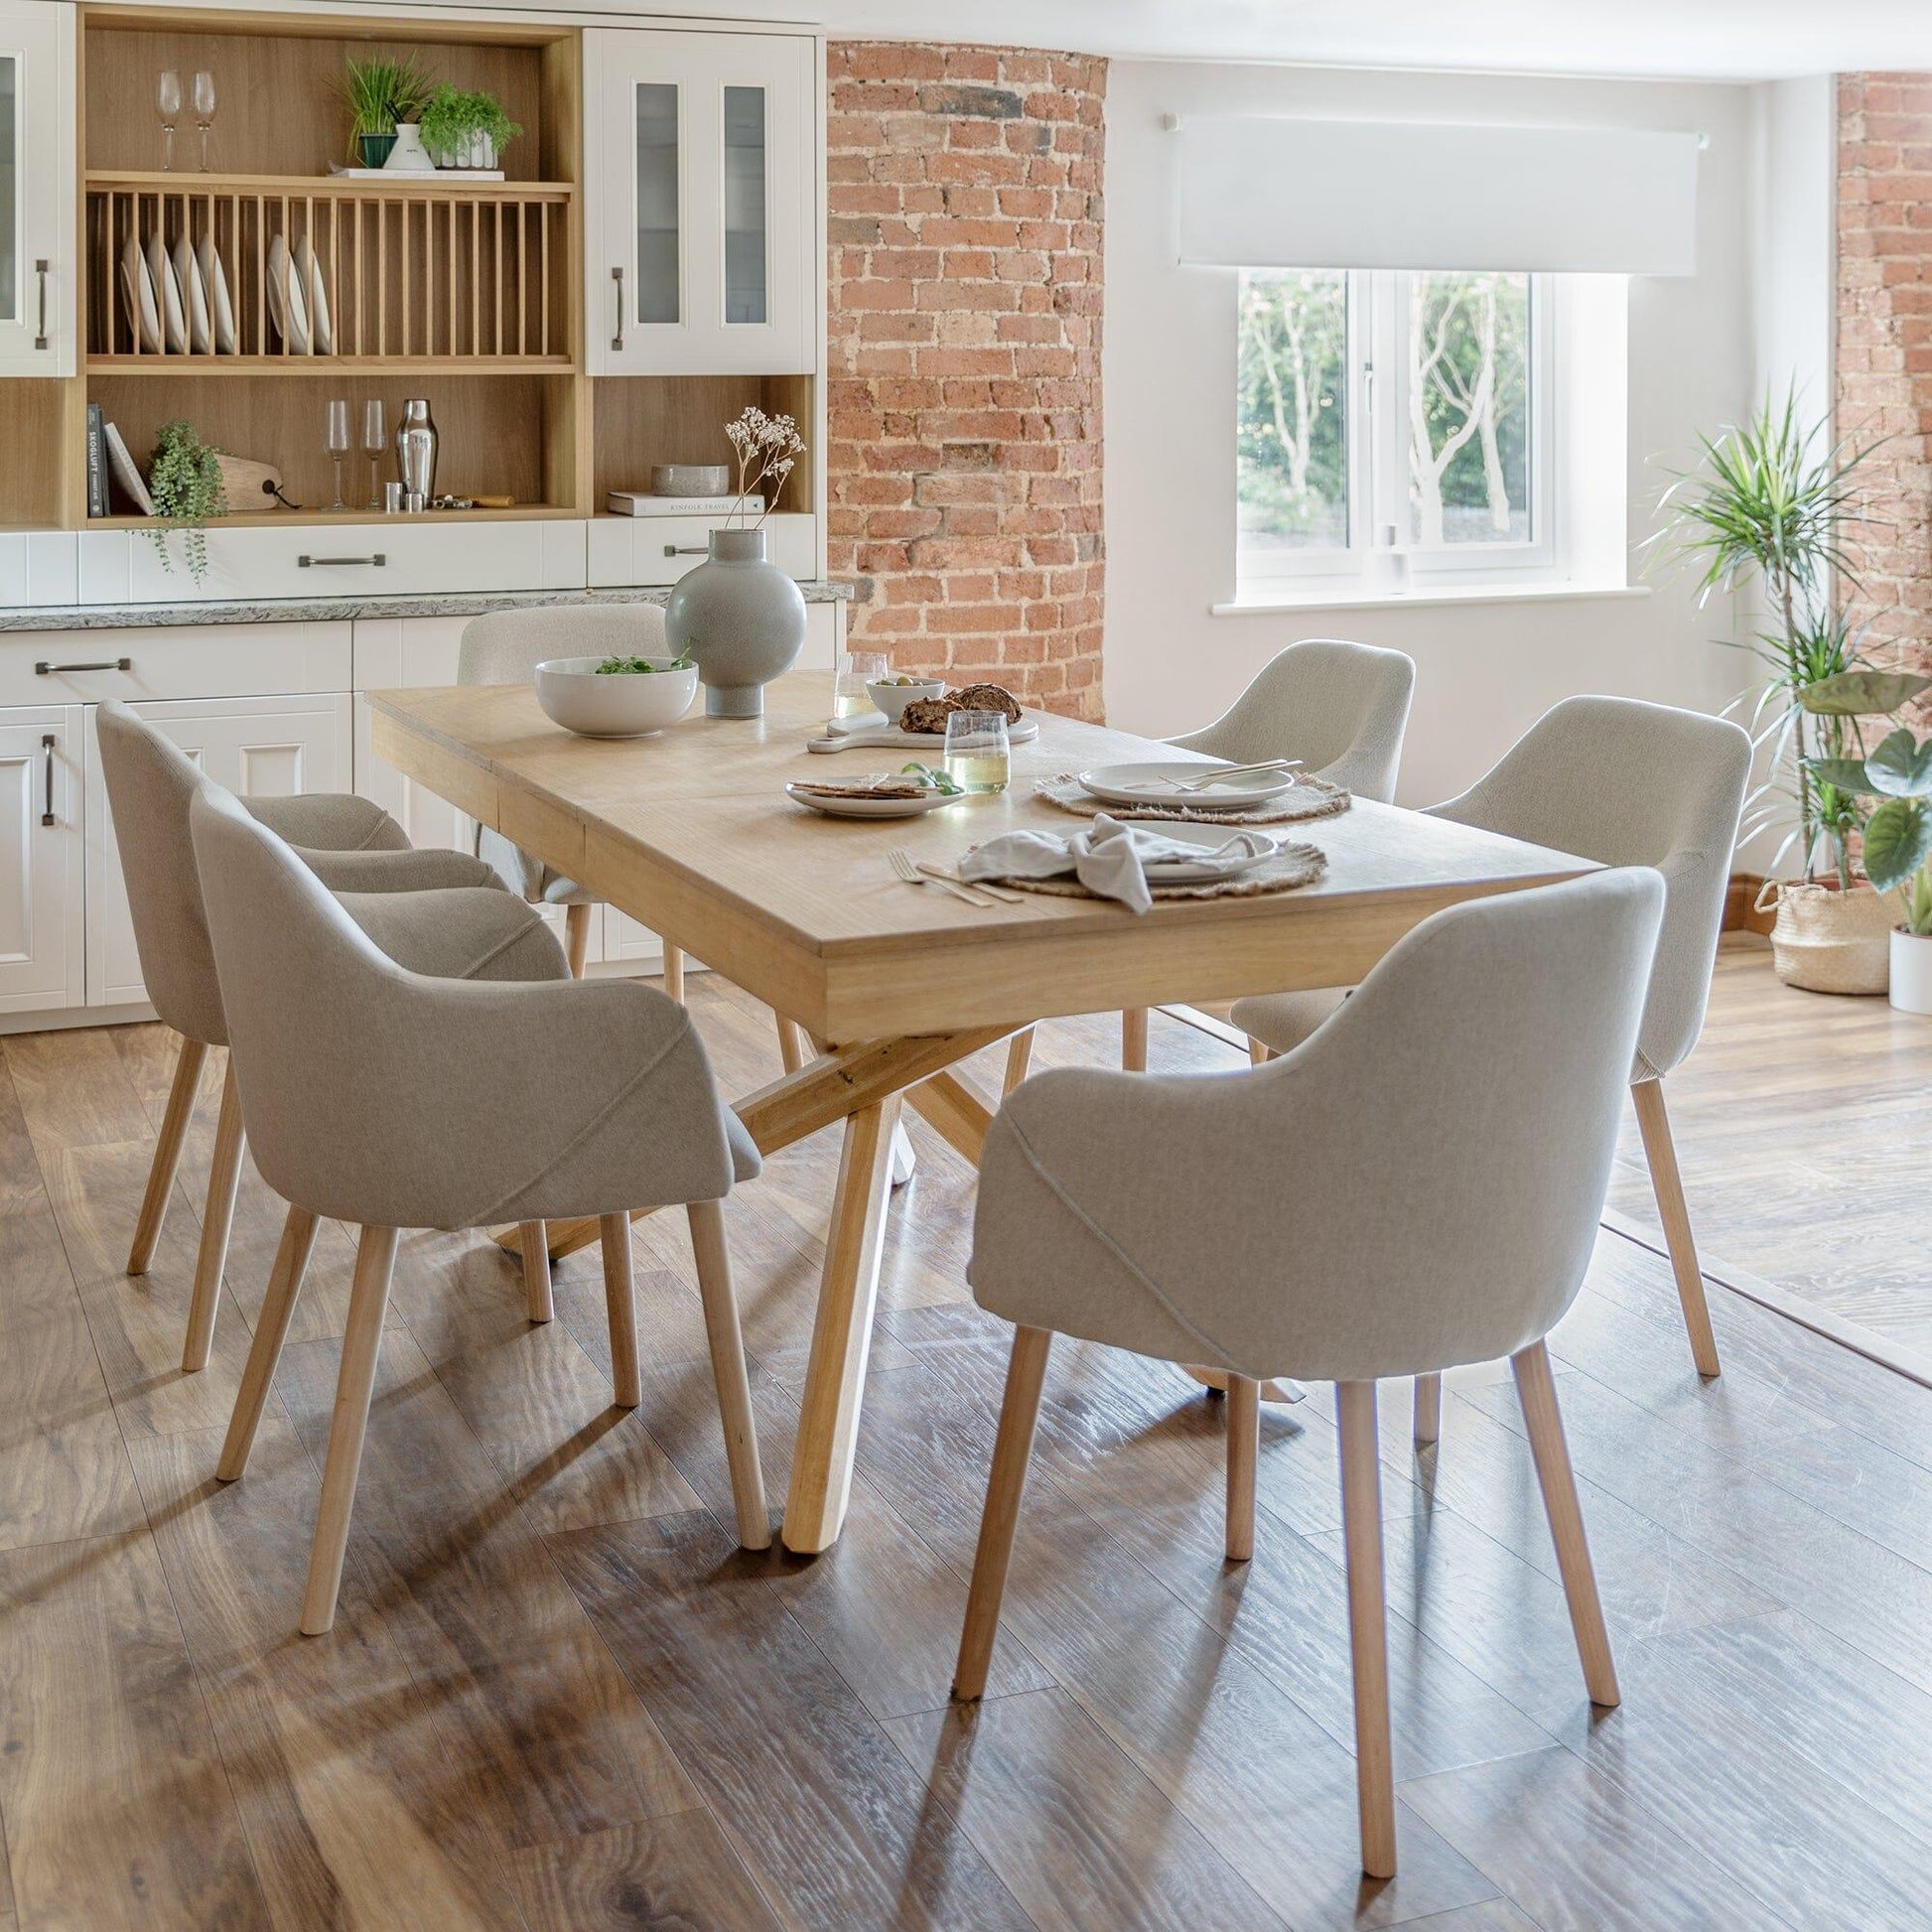 Amelia Whitewash Extendable Dining Table Set - 6 Seater - Freya Oatmeal Carver Chairs With Oak Legs - Laura James